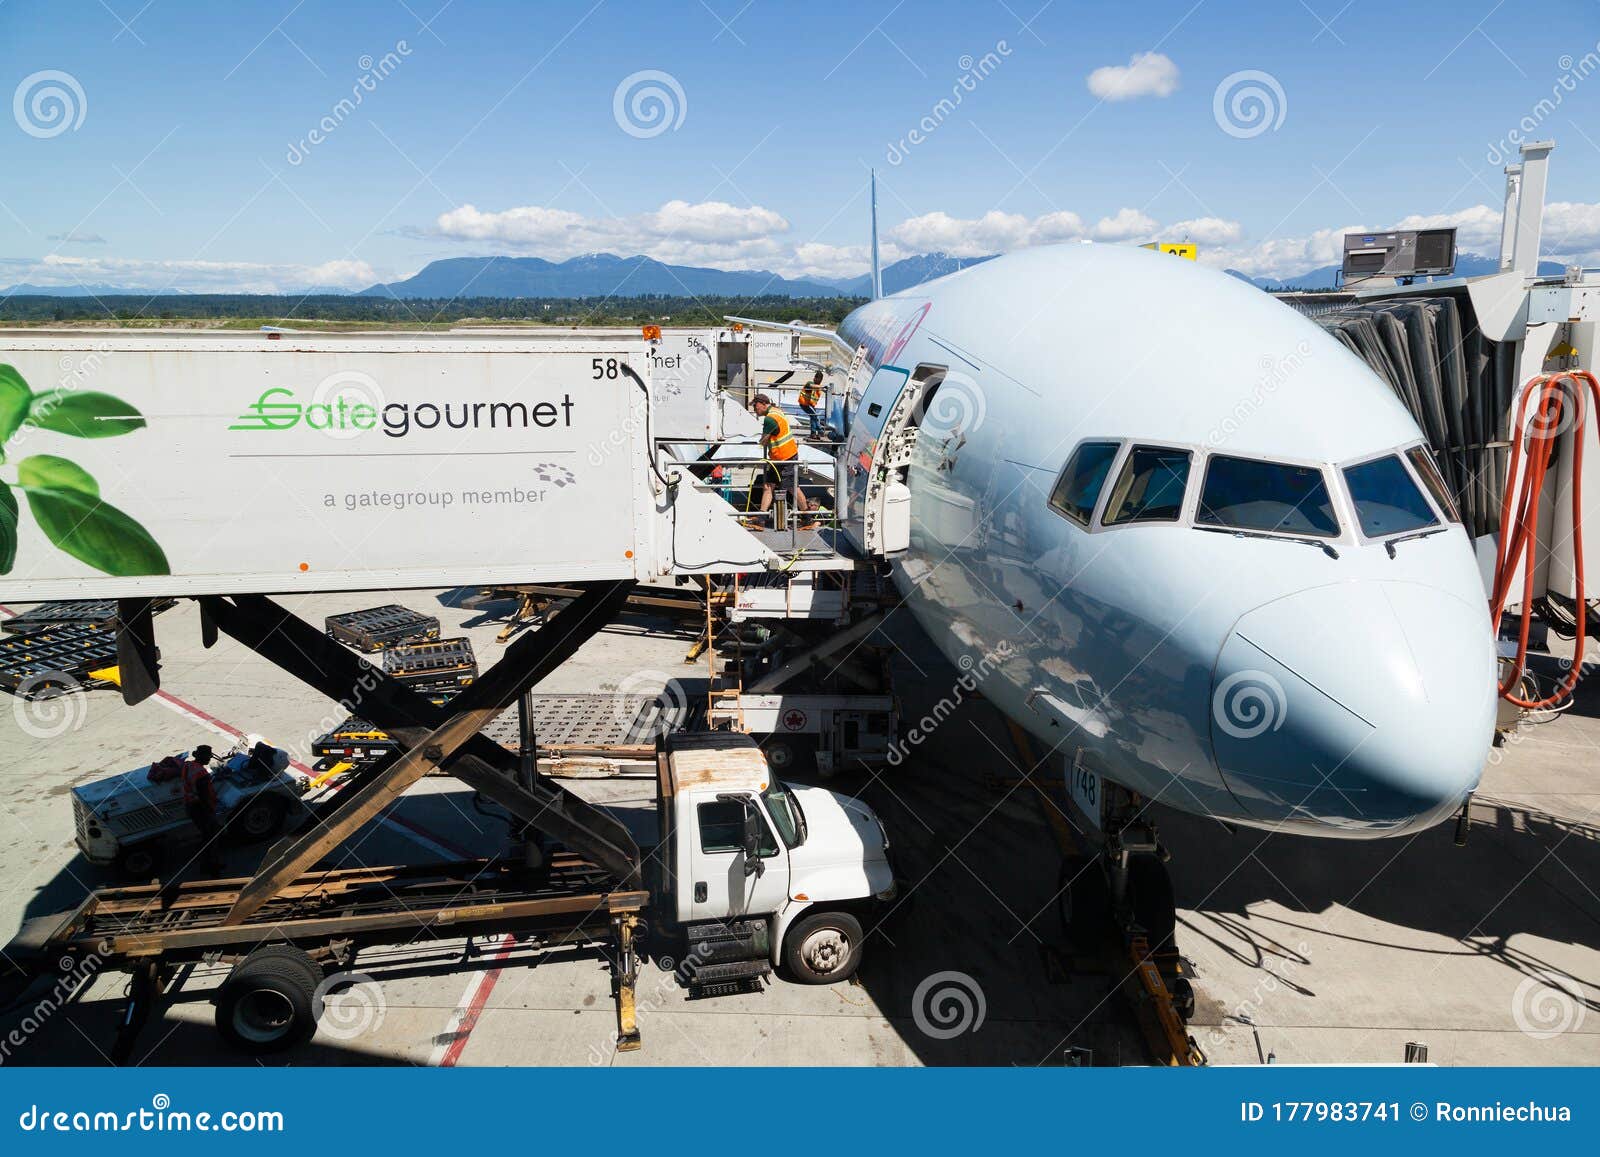 Loading Airport Meals From Gate Gourmet Containters Onto Aircraft Editorial Photo Image Of Loading Gourmet